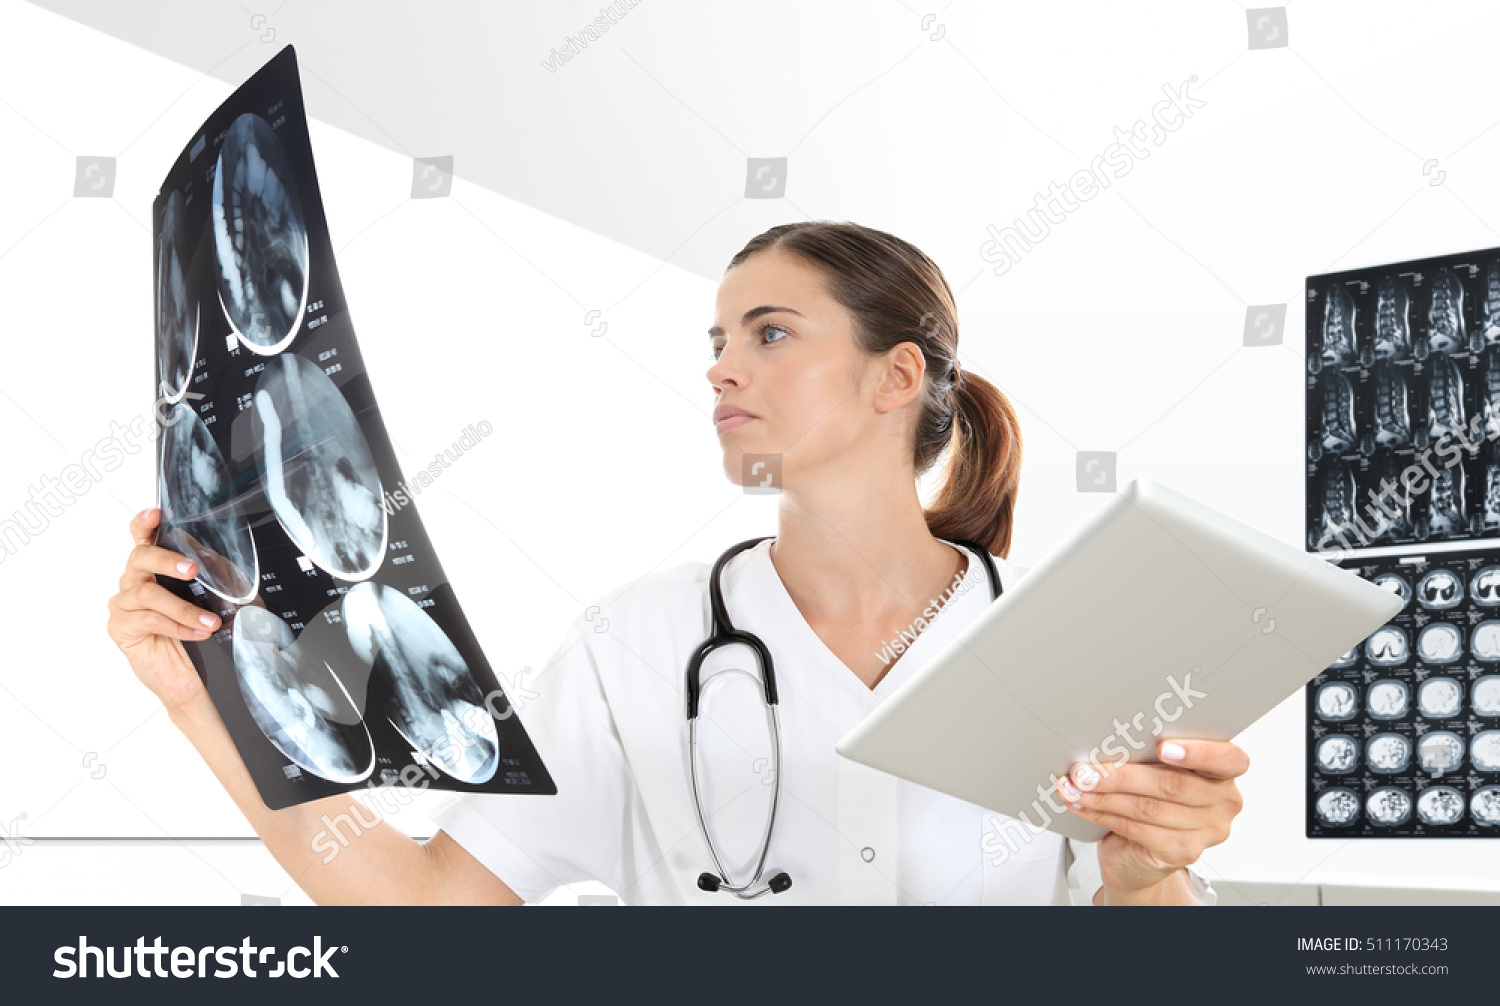 Radiologist woman checking x-ray, health care, medical and radiology concept #511170343